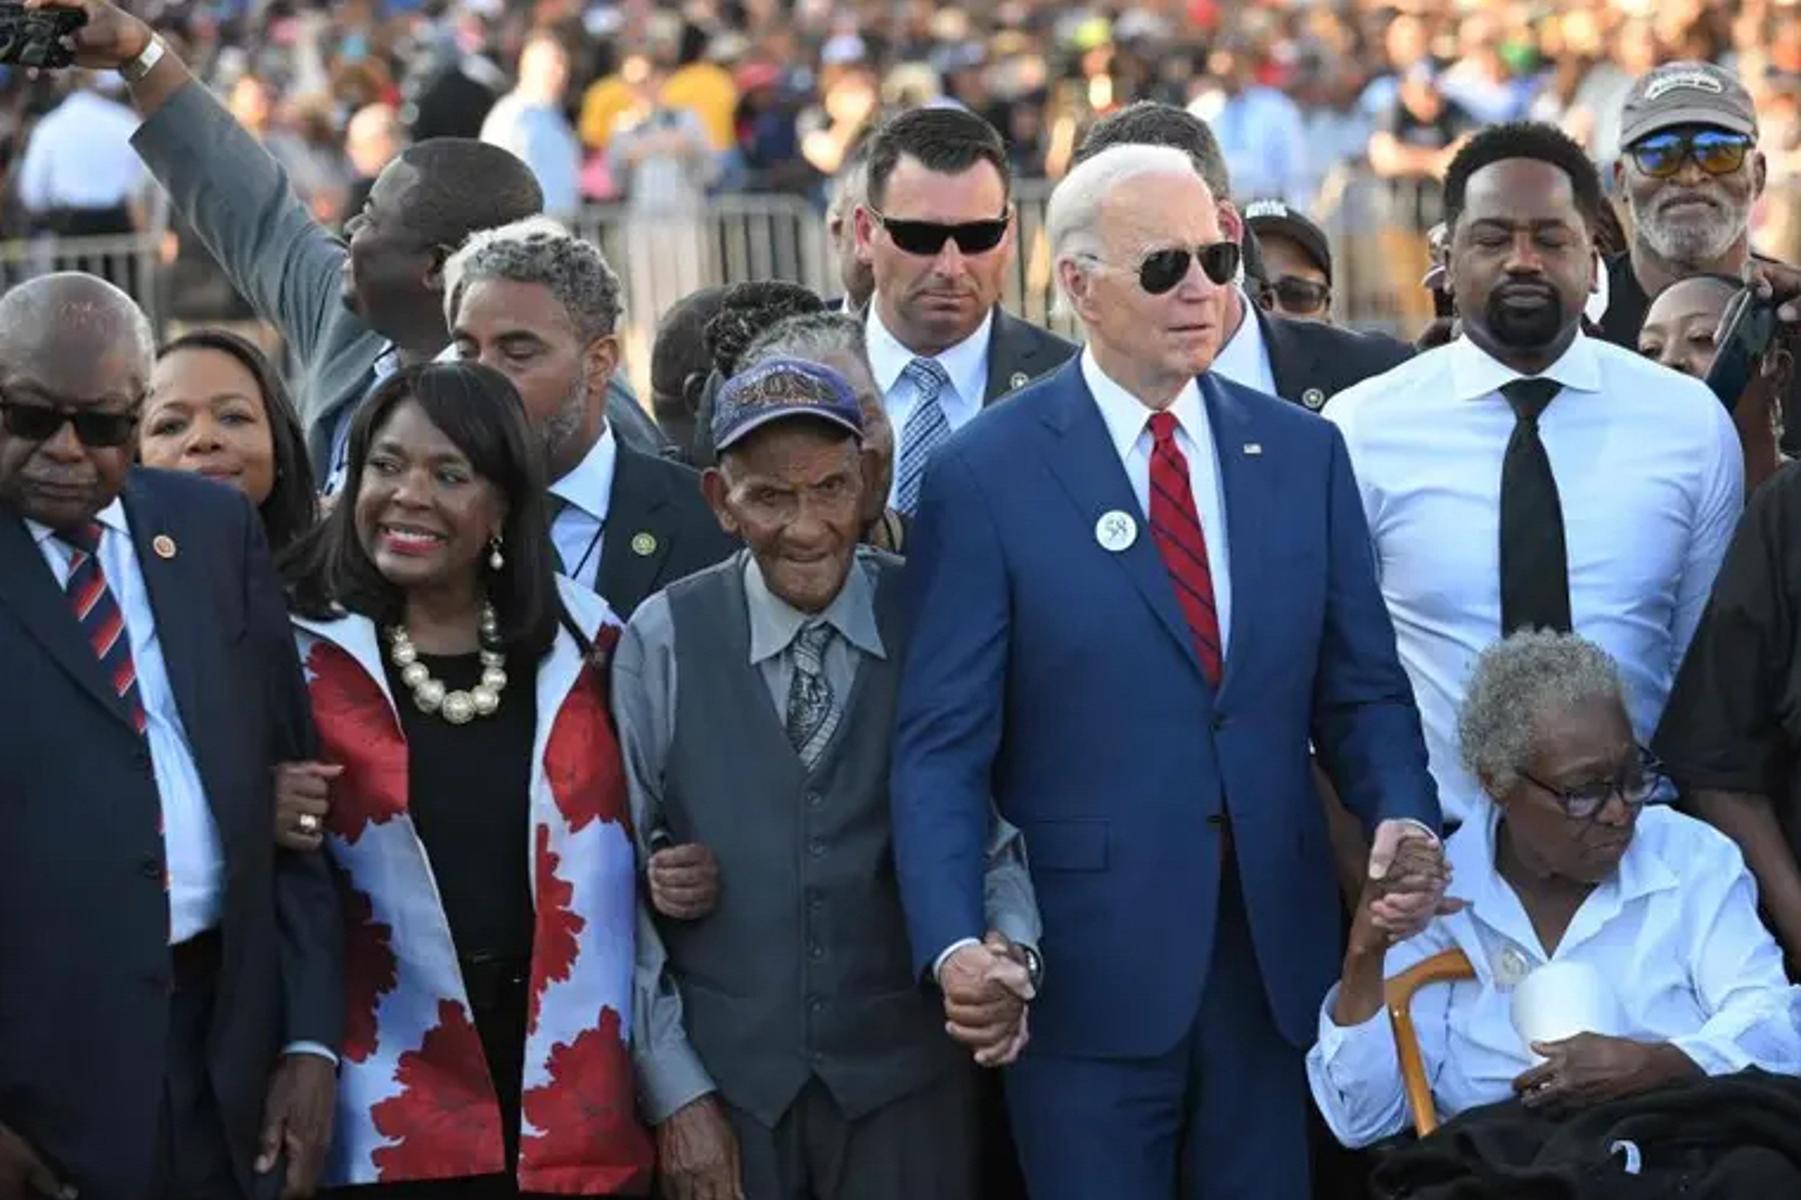 Read More - VIDEO: Rep. Sewell Welcomes President Biden and Colleagues to Alabama to Commemorate 58th Anniversary of Bloody Sunday